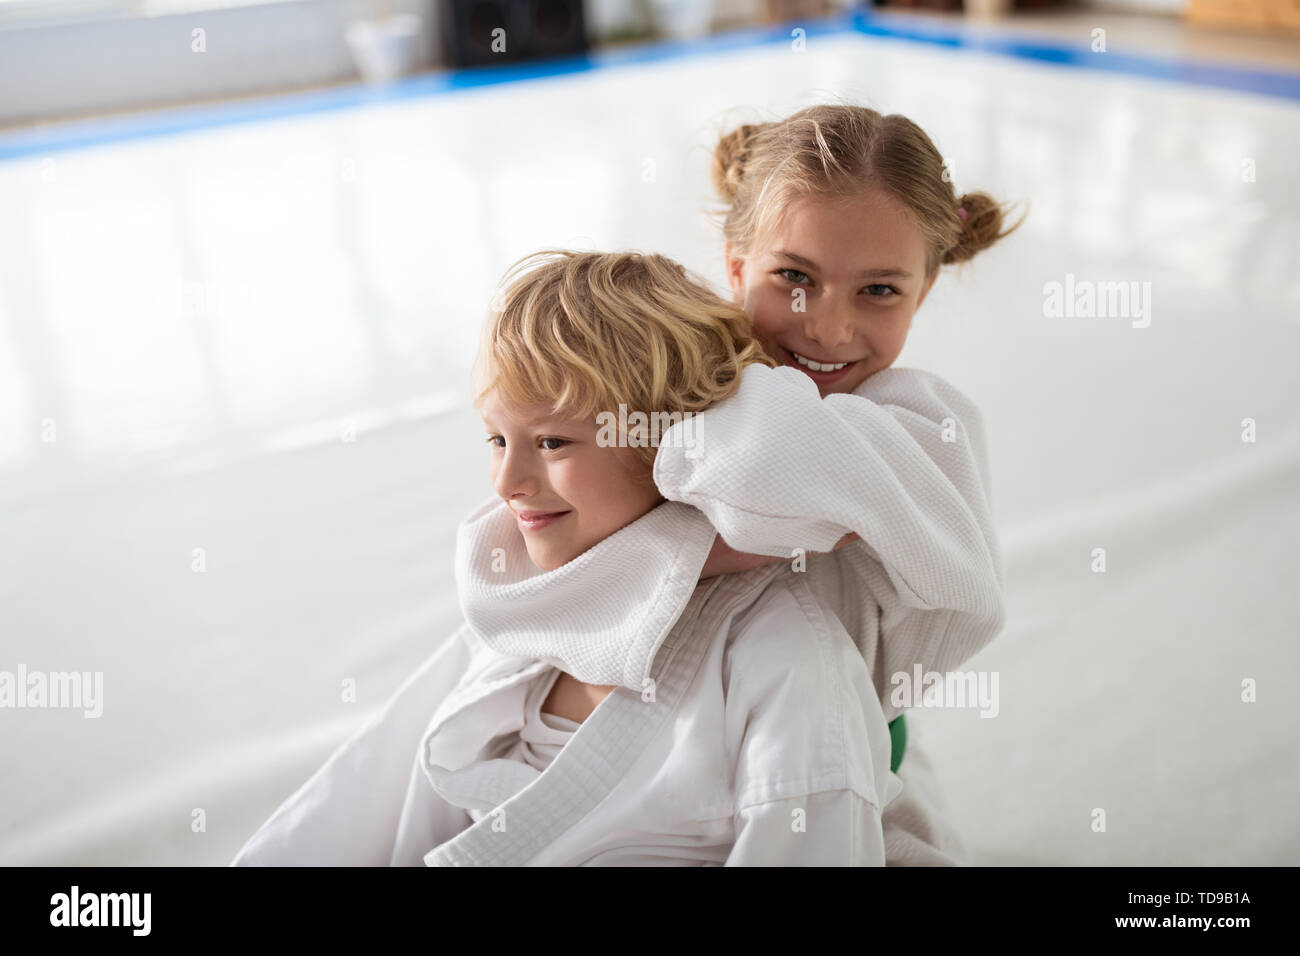 Girl happy. Beautiful positive girl feeling happy after winning aikido fight with boy Stock Photo